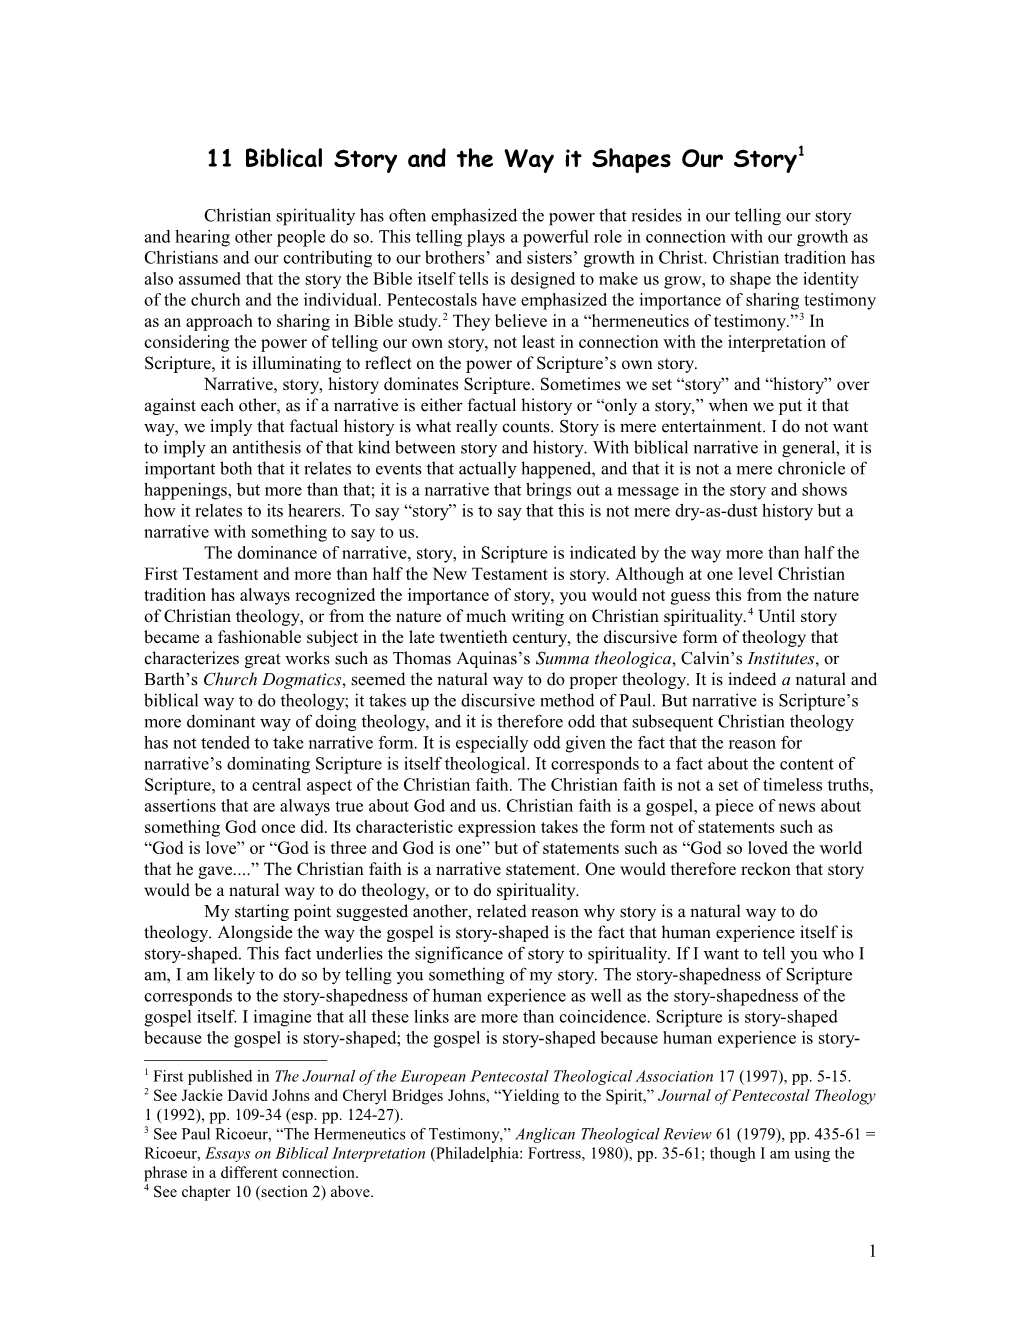 Biblical Story and the Way It Shapes Our Story